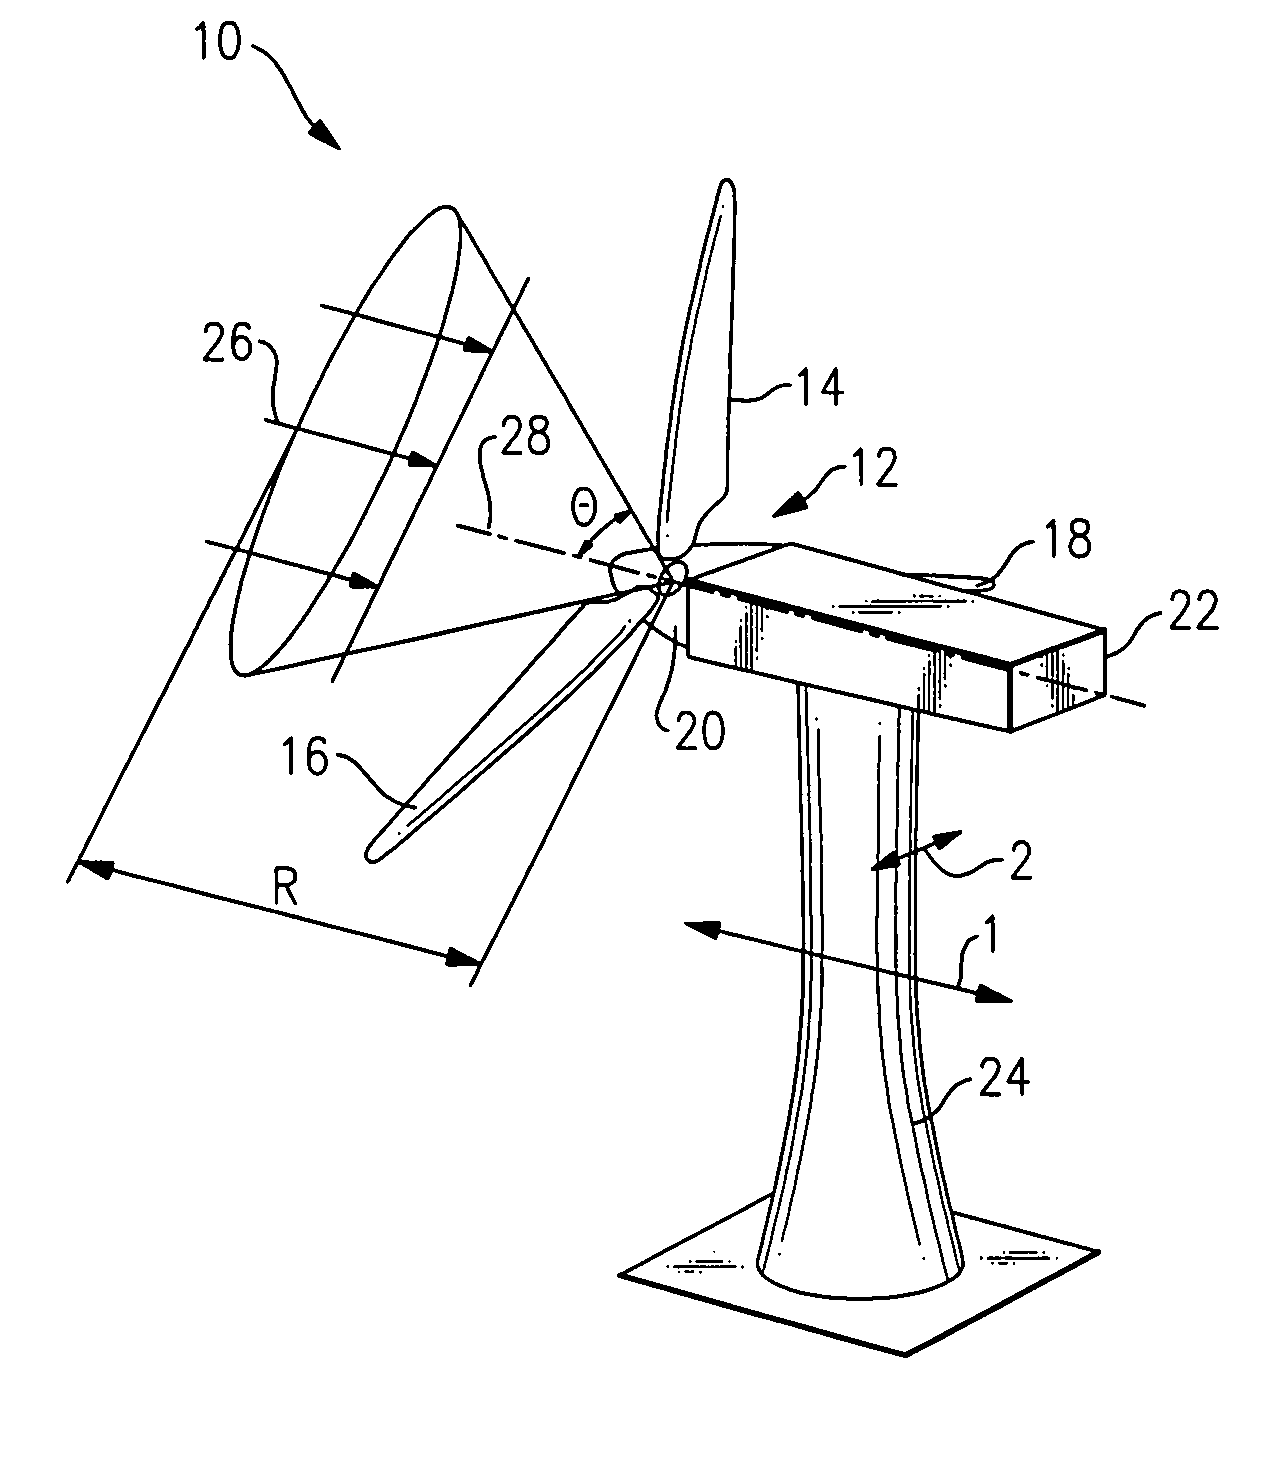 System and method for loads reduction in a horizontal-axis wind turbine using upwind information